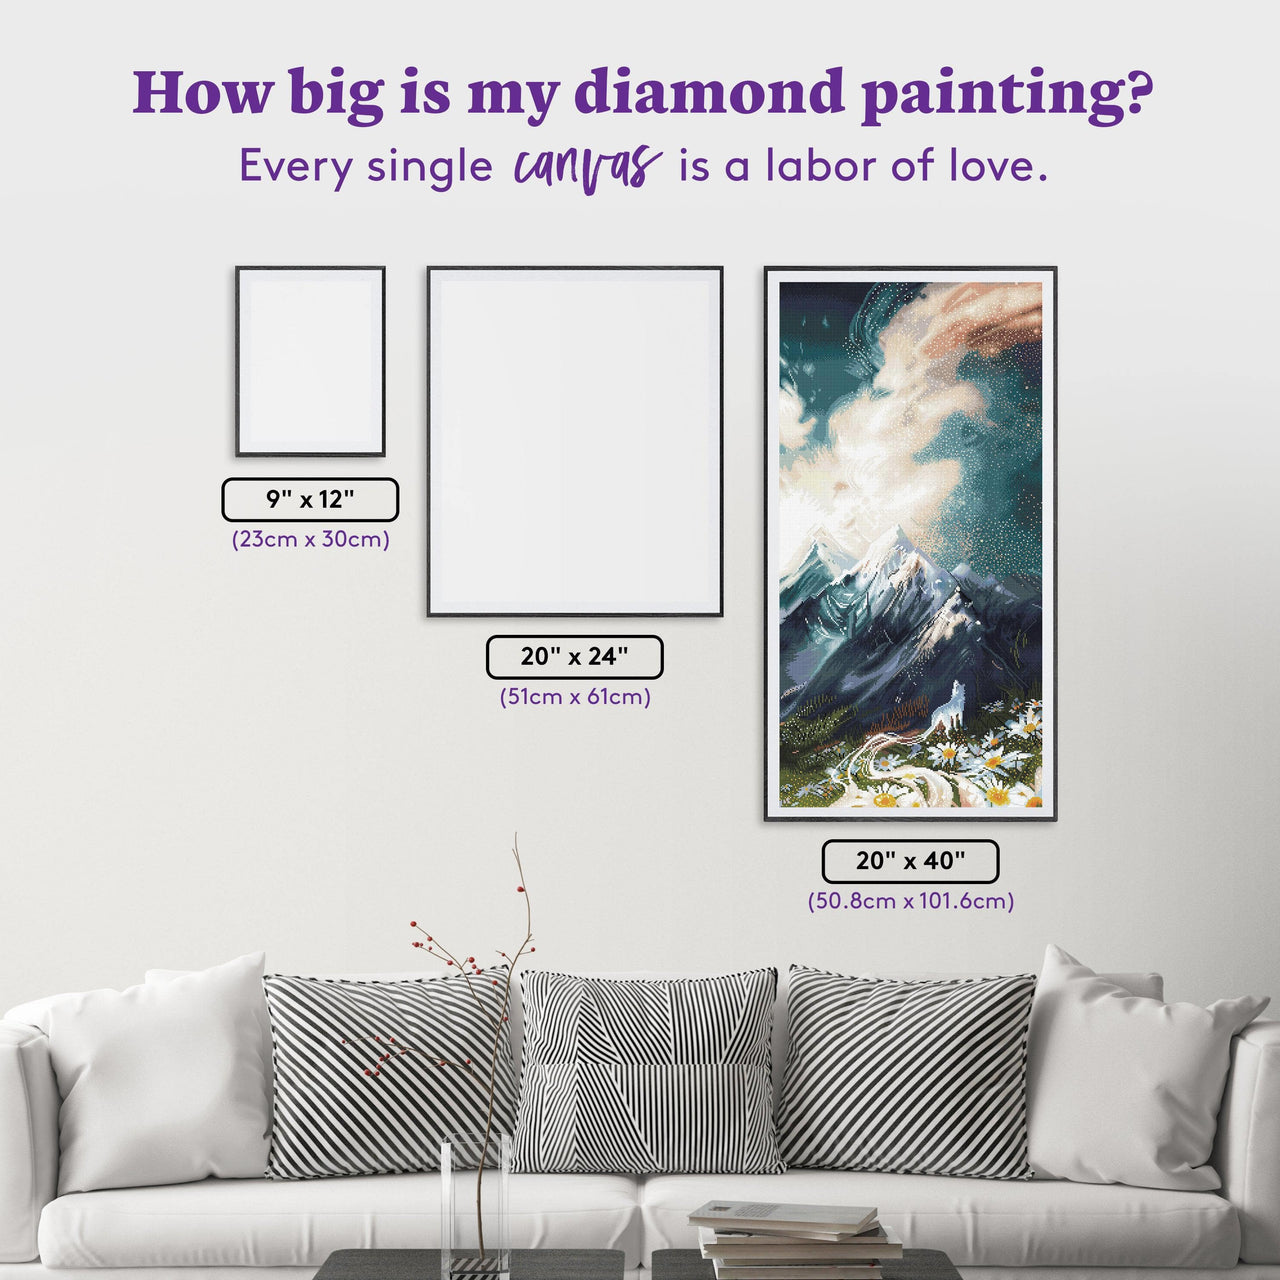 Diamond Painting Star Spray 20" x 40" (50.8cm x 101.6cm) / Square with 54 Colors including 2 ABs and 1 Fairy Dust Diamonds / 83,232